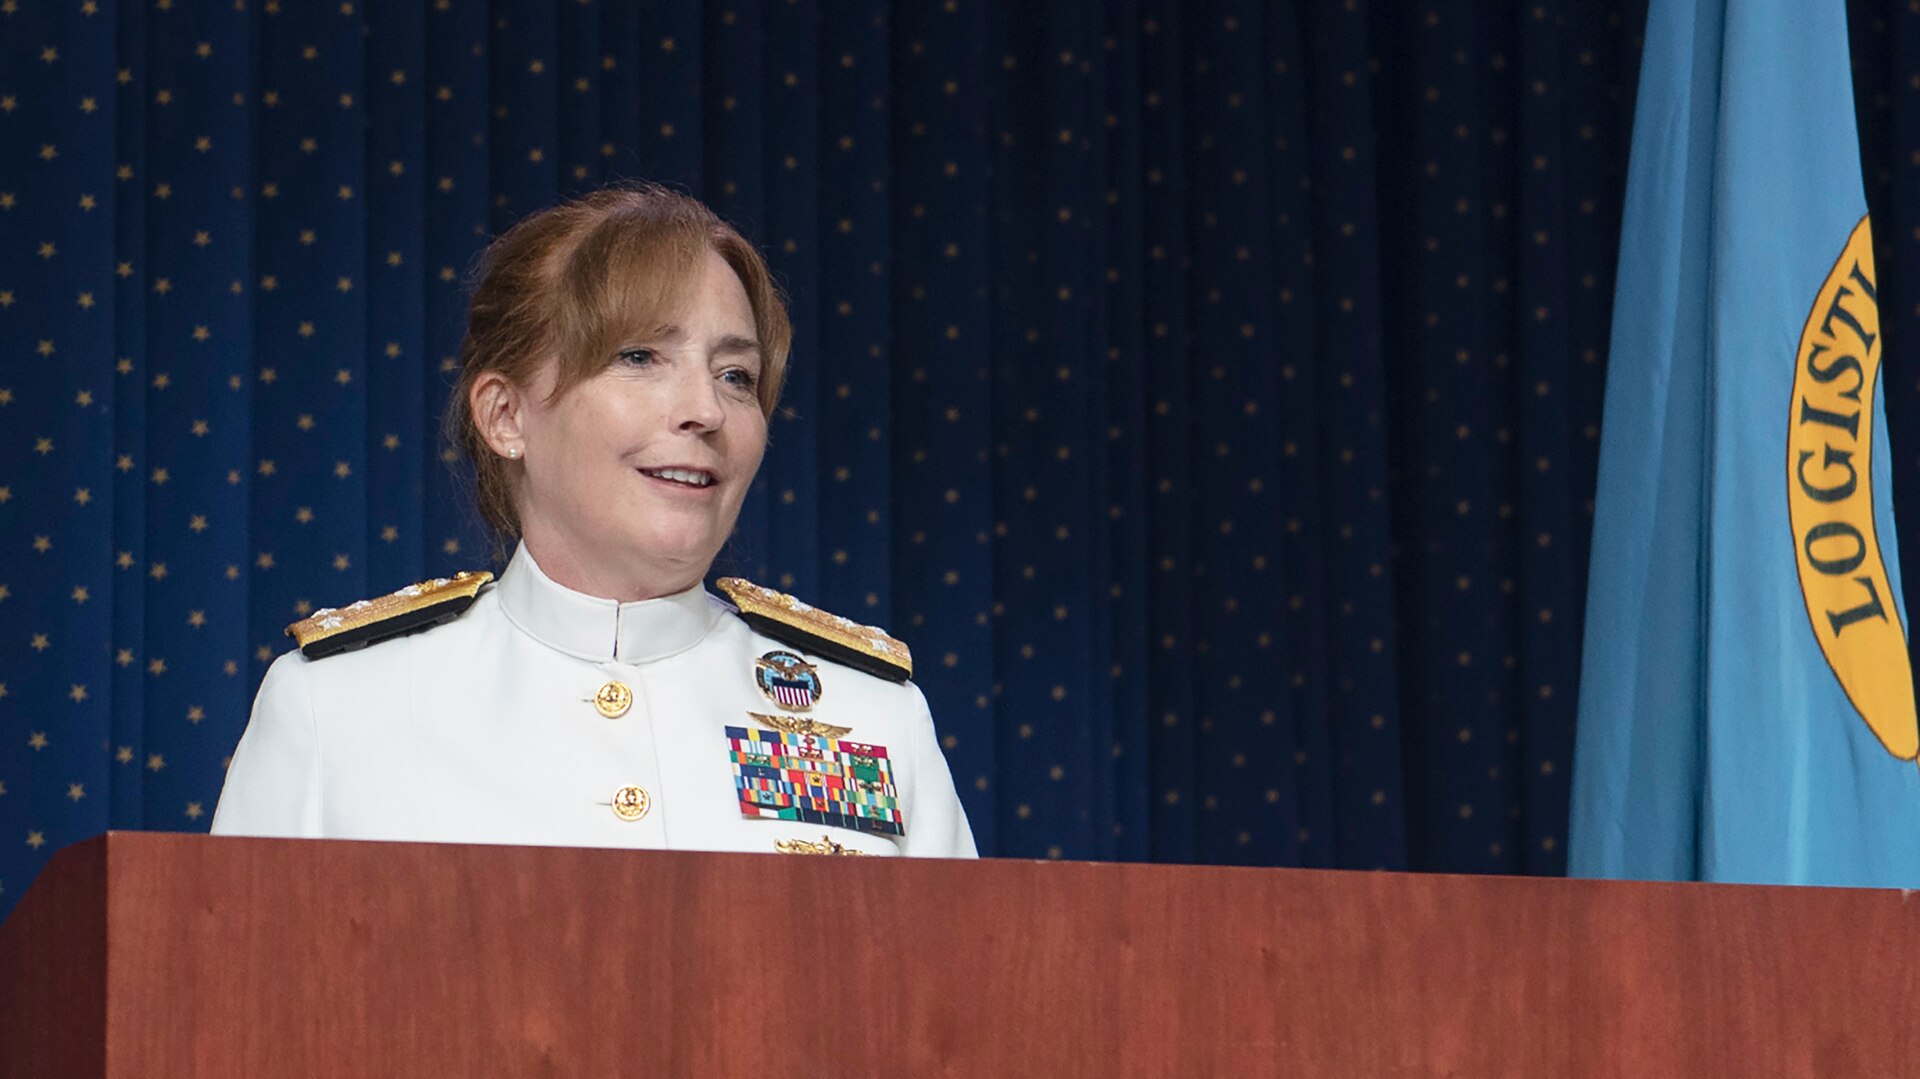 Woman in white Navy dress uniform speaks at a podium with the Defense Logistics Agency flag in the background.